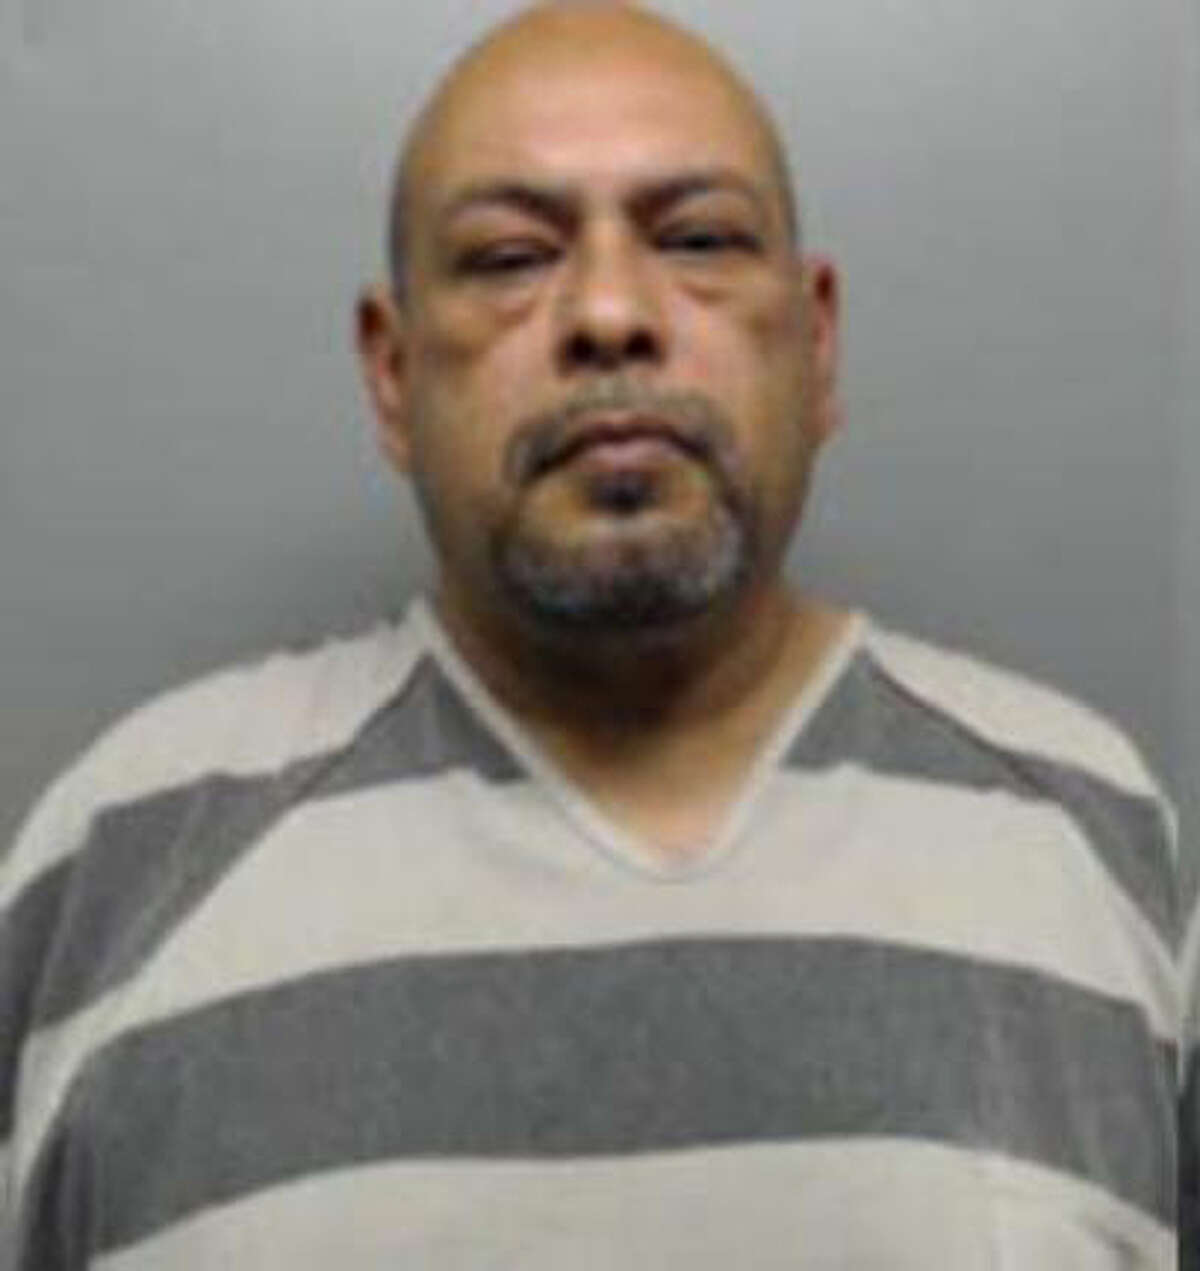 Lt. Fernando Garcia is pictured. Keep clicking through the gallery to see mugshots from Webb County's Operation GOTCHA.